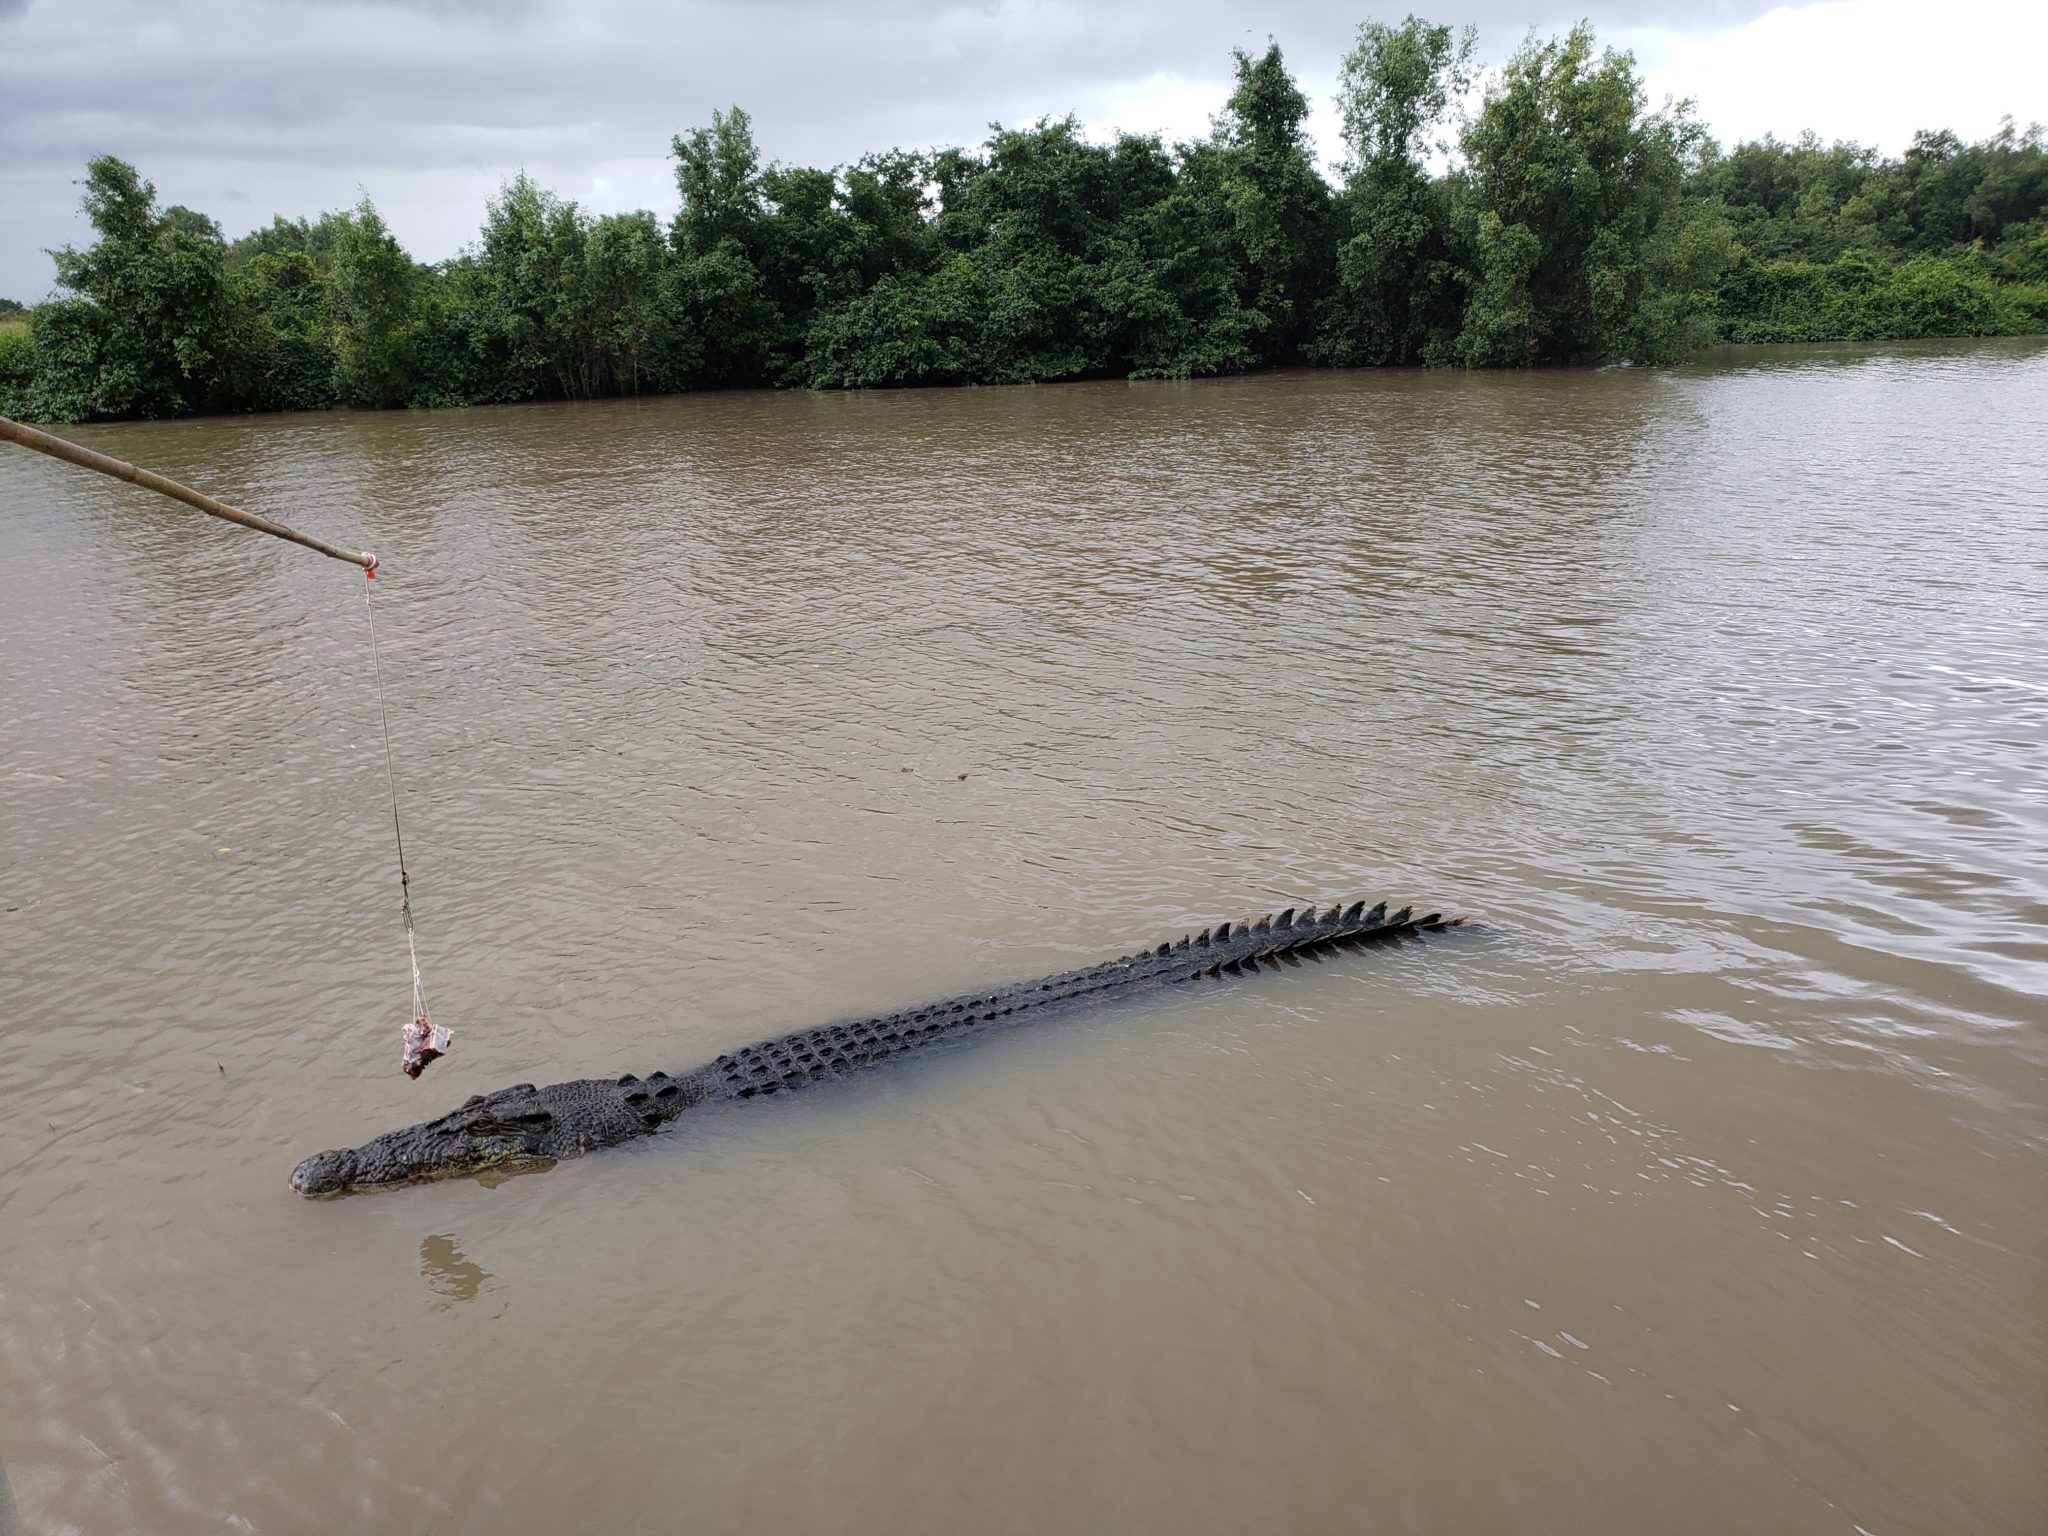 a person fishing a crocodile in the water